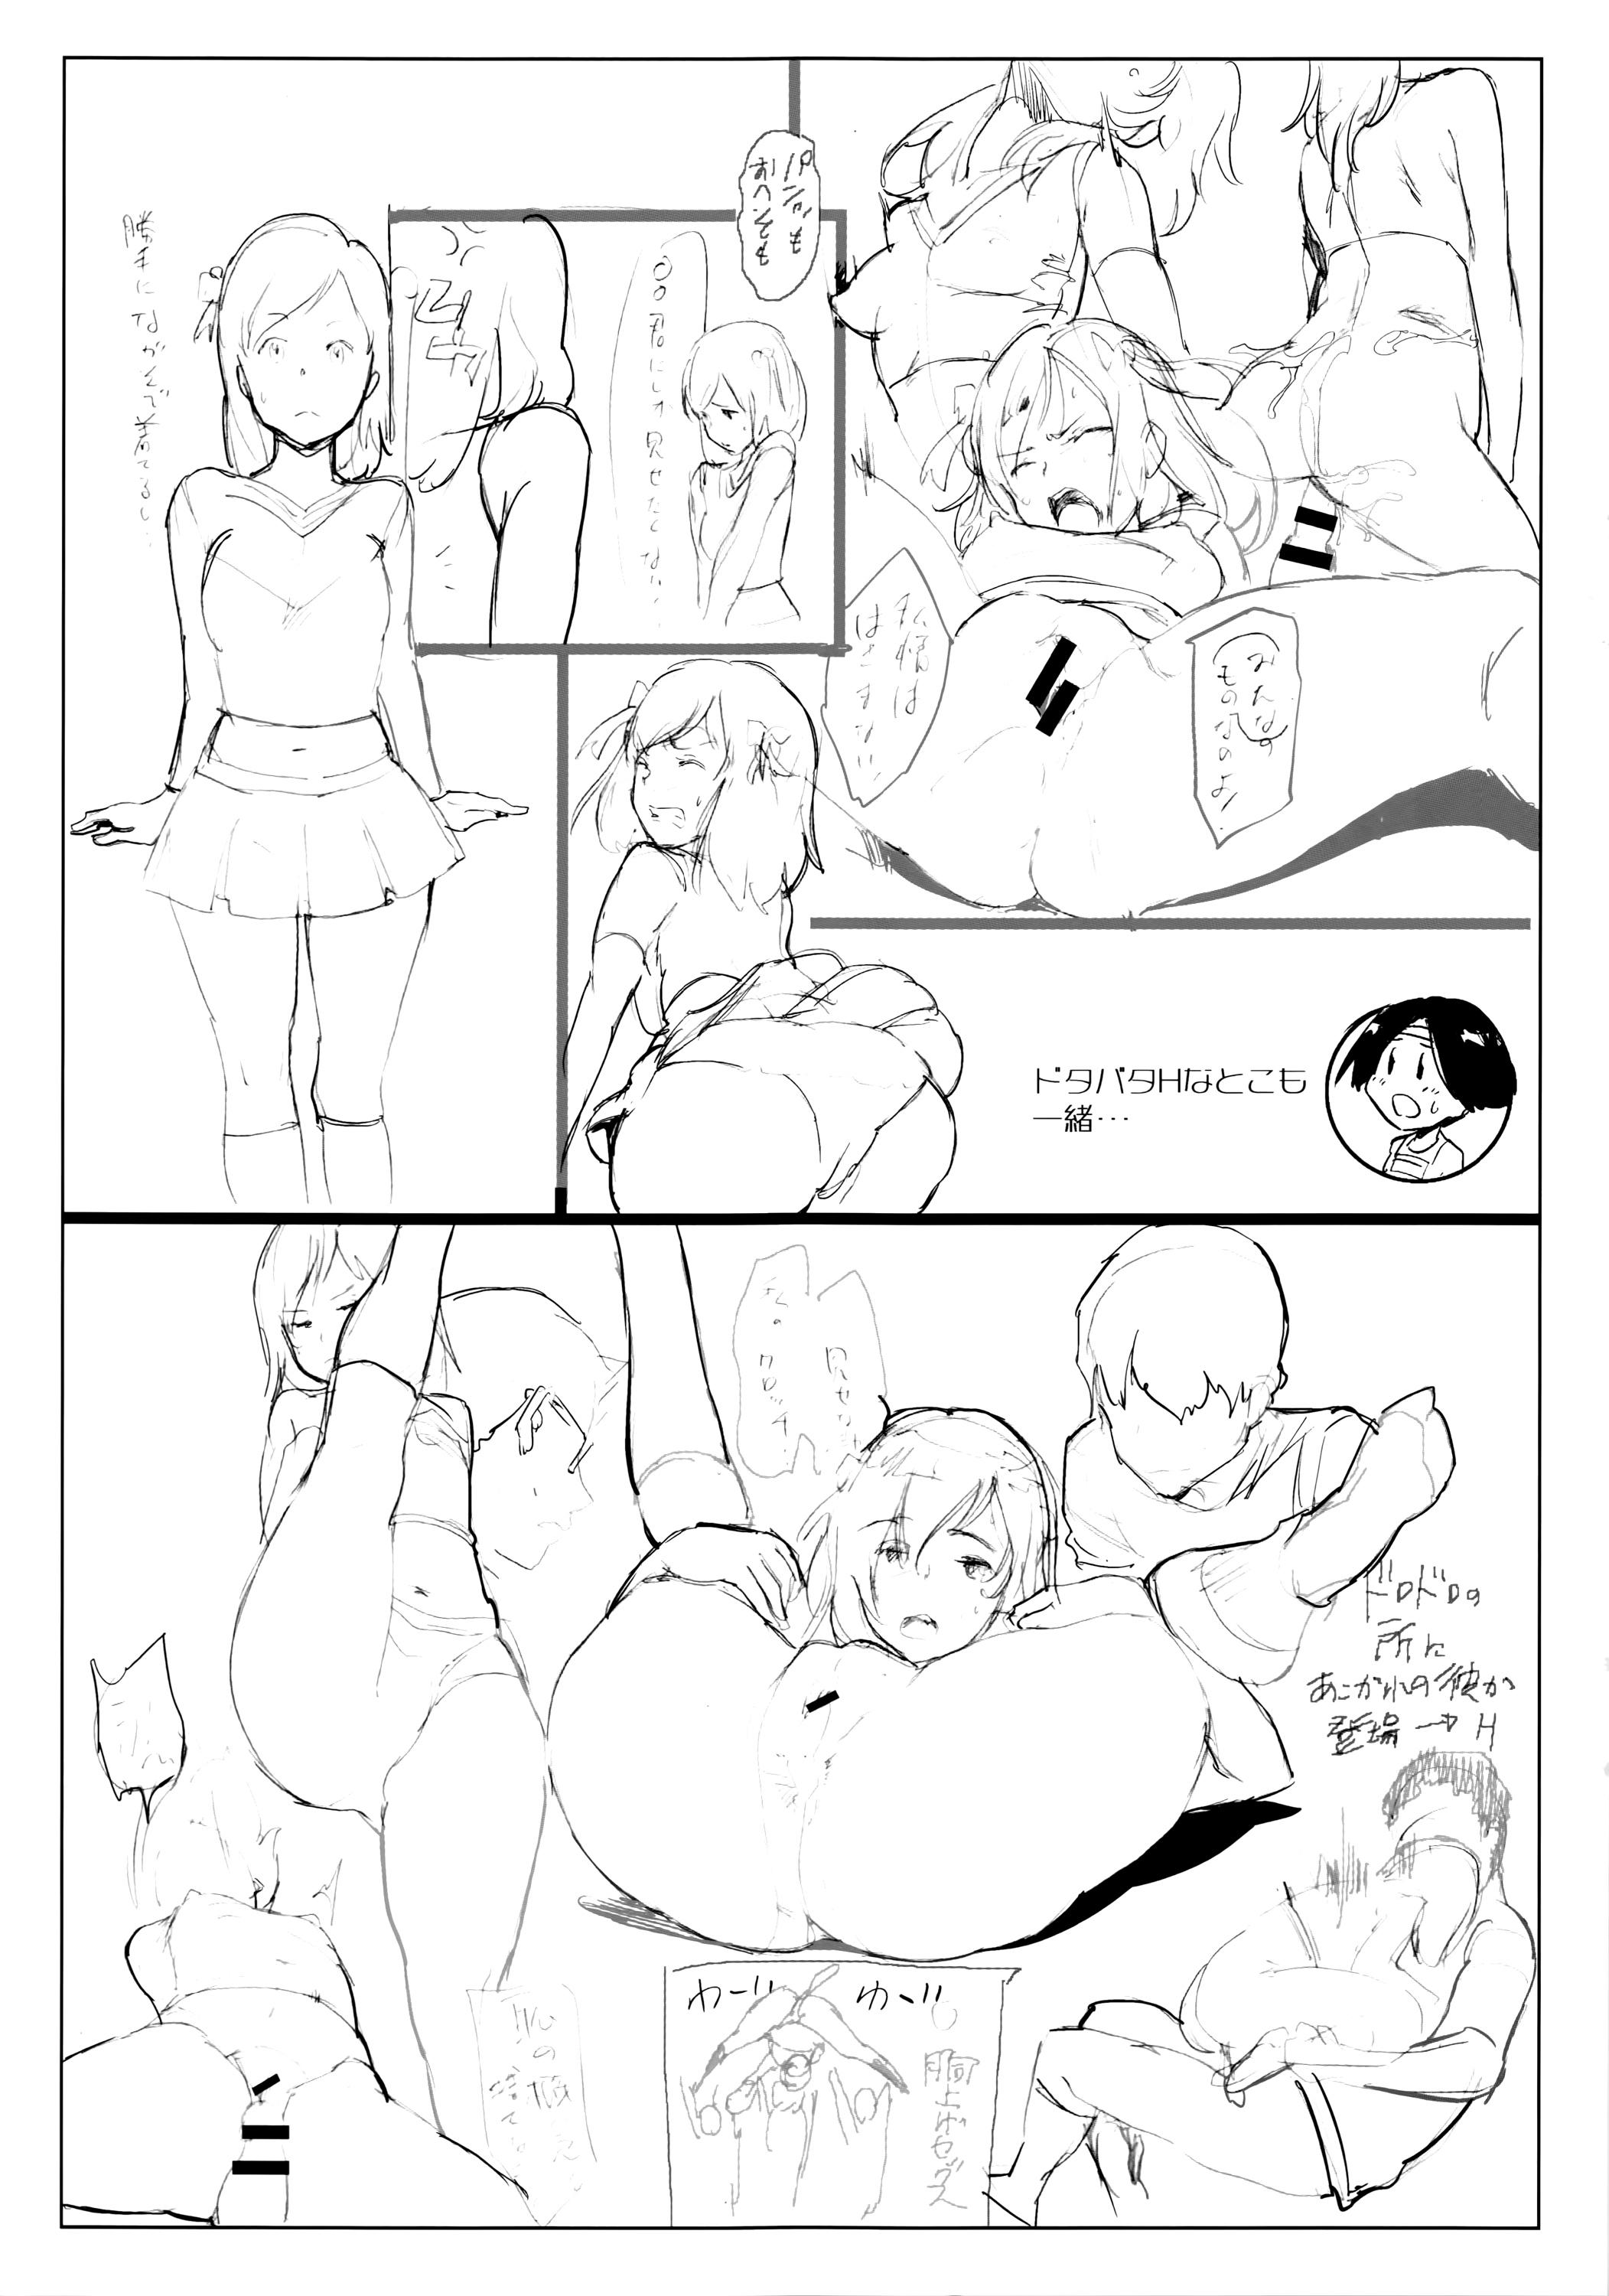 Trimmed Girls Talk Gaping - Page 230